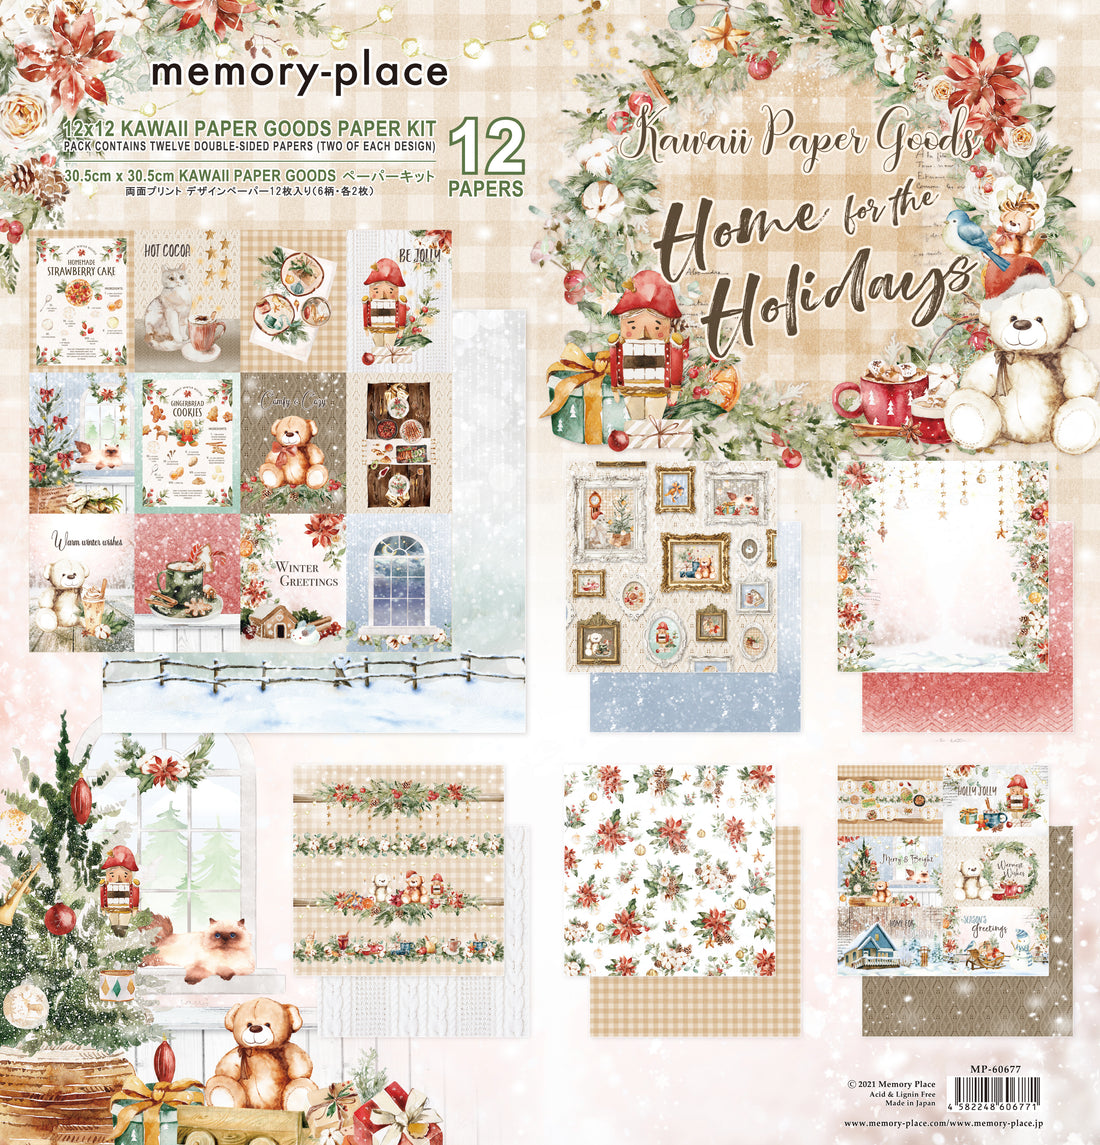 12x12 - Home for the Holidays - Memory Place, Asuka - Messy Papercrafts